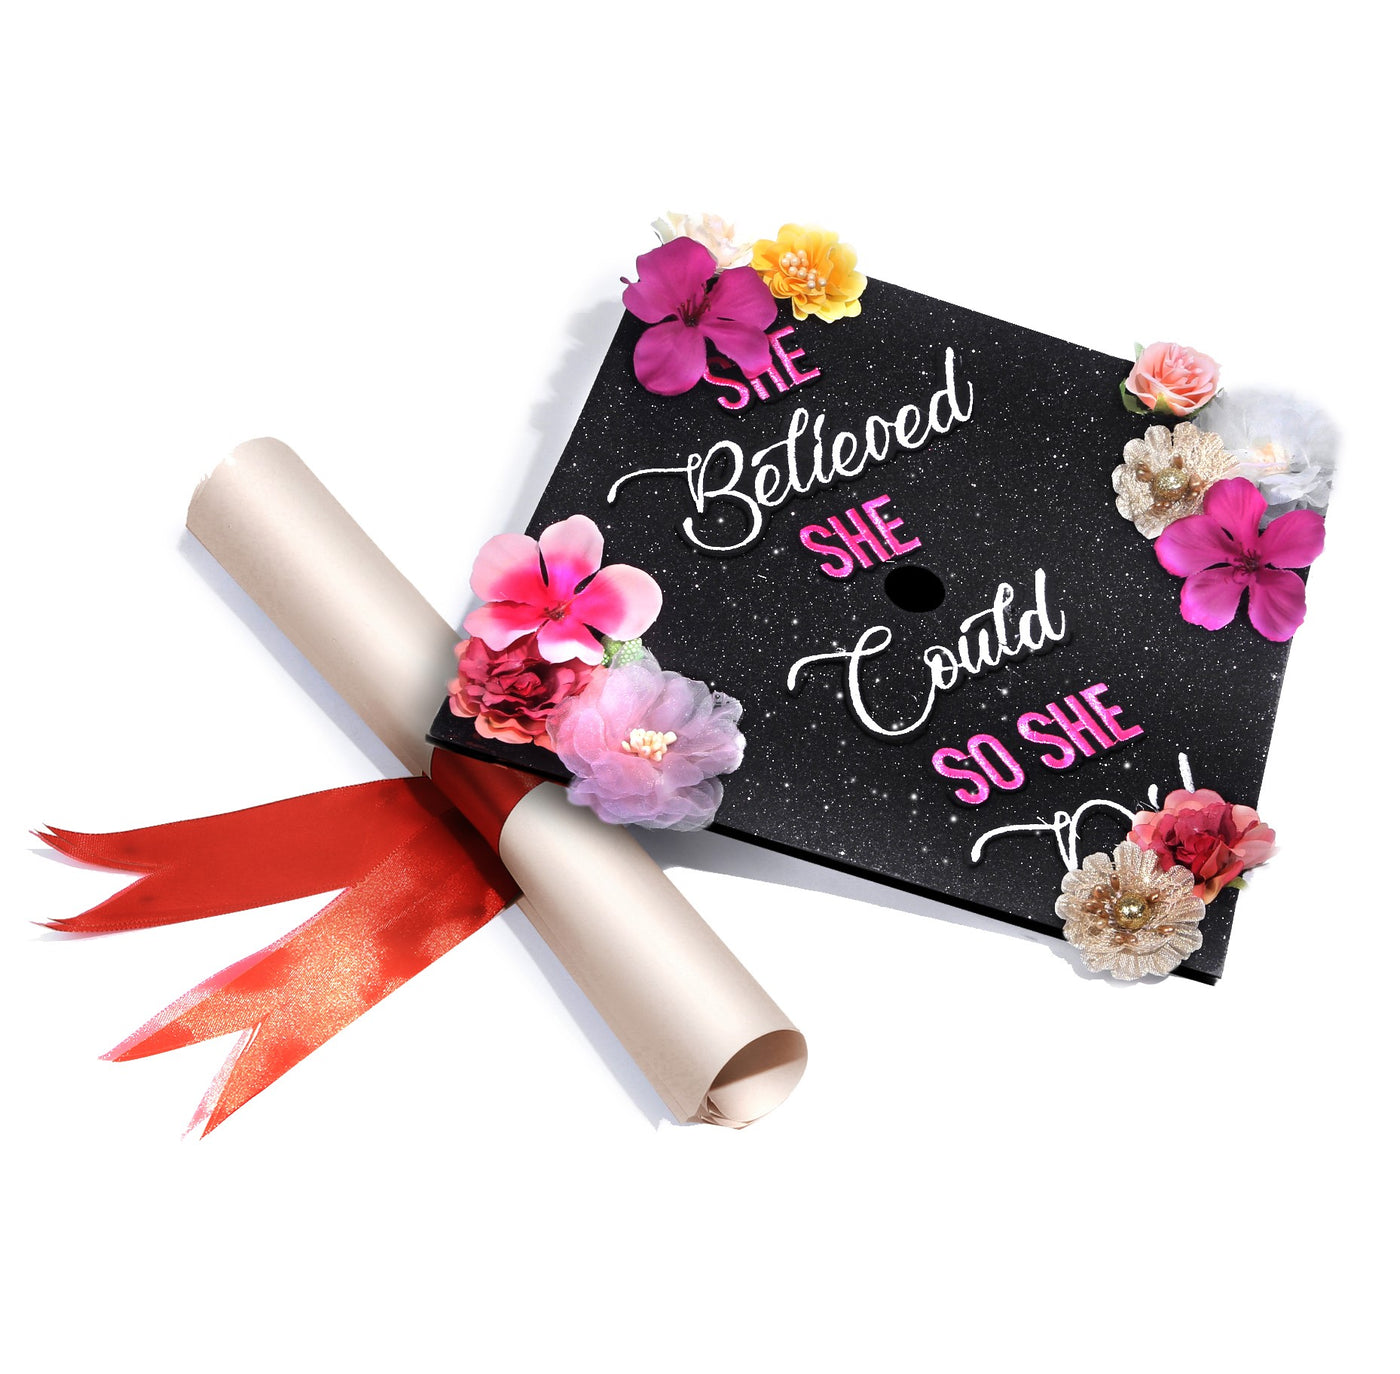 Handmade Graduation Cap Topper, Graduation Cap Decorations, She Believe She Could So She Did